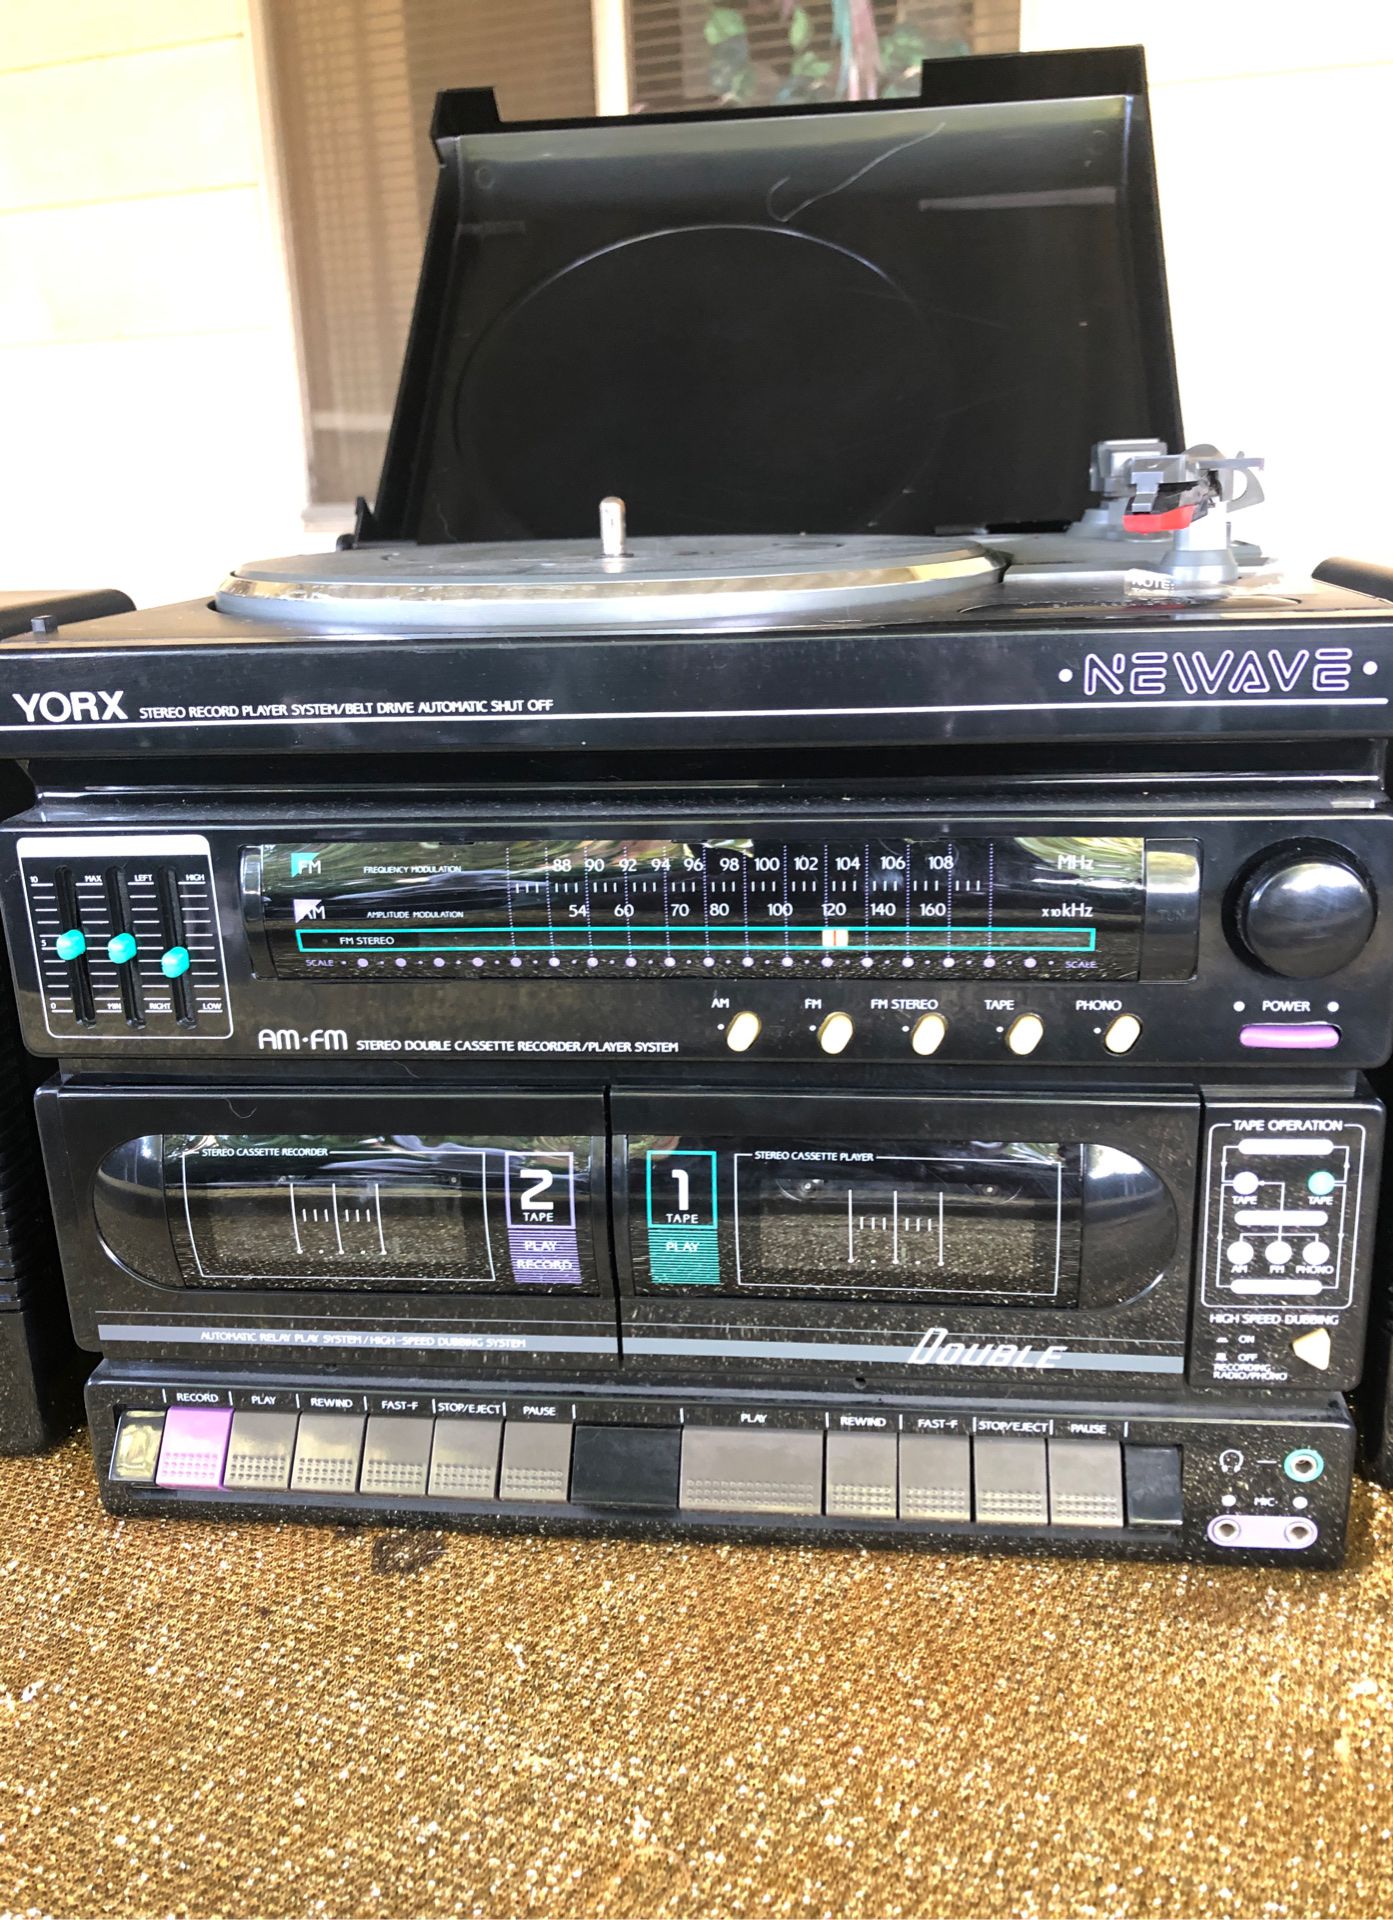 Vintage Yorx Newave Stereo Record Player System for Sale in Nuevo, CA ...